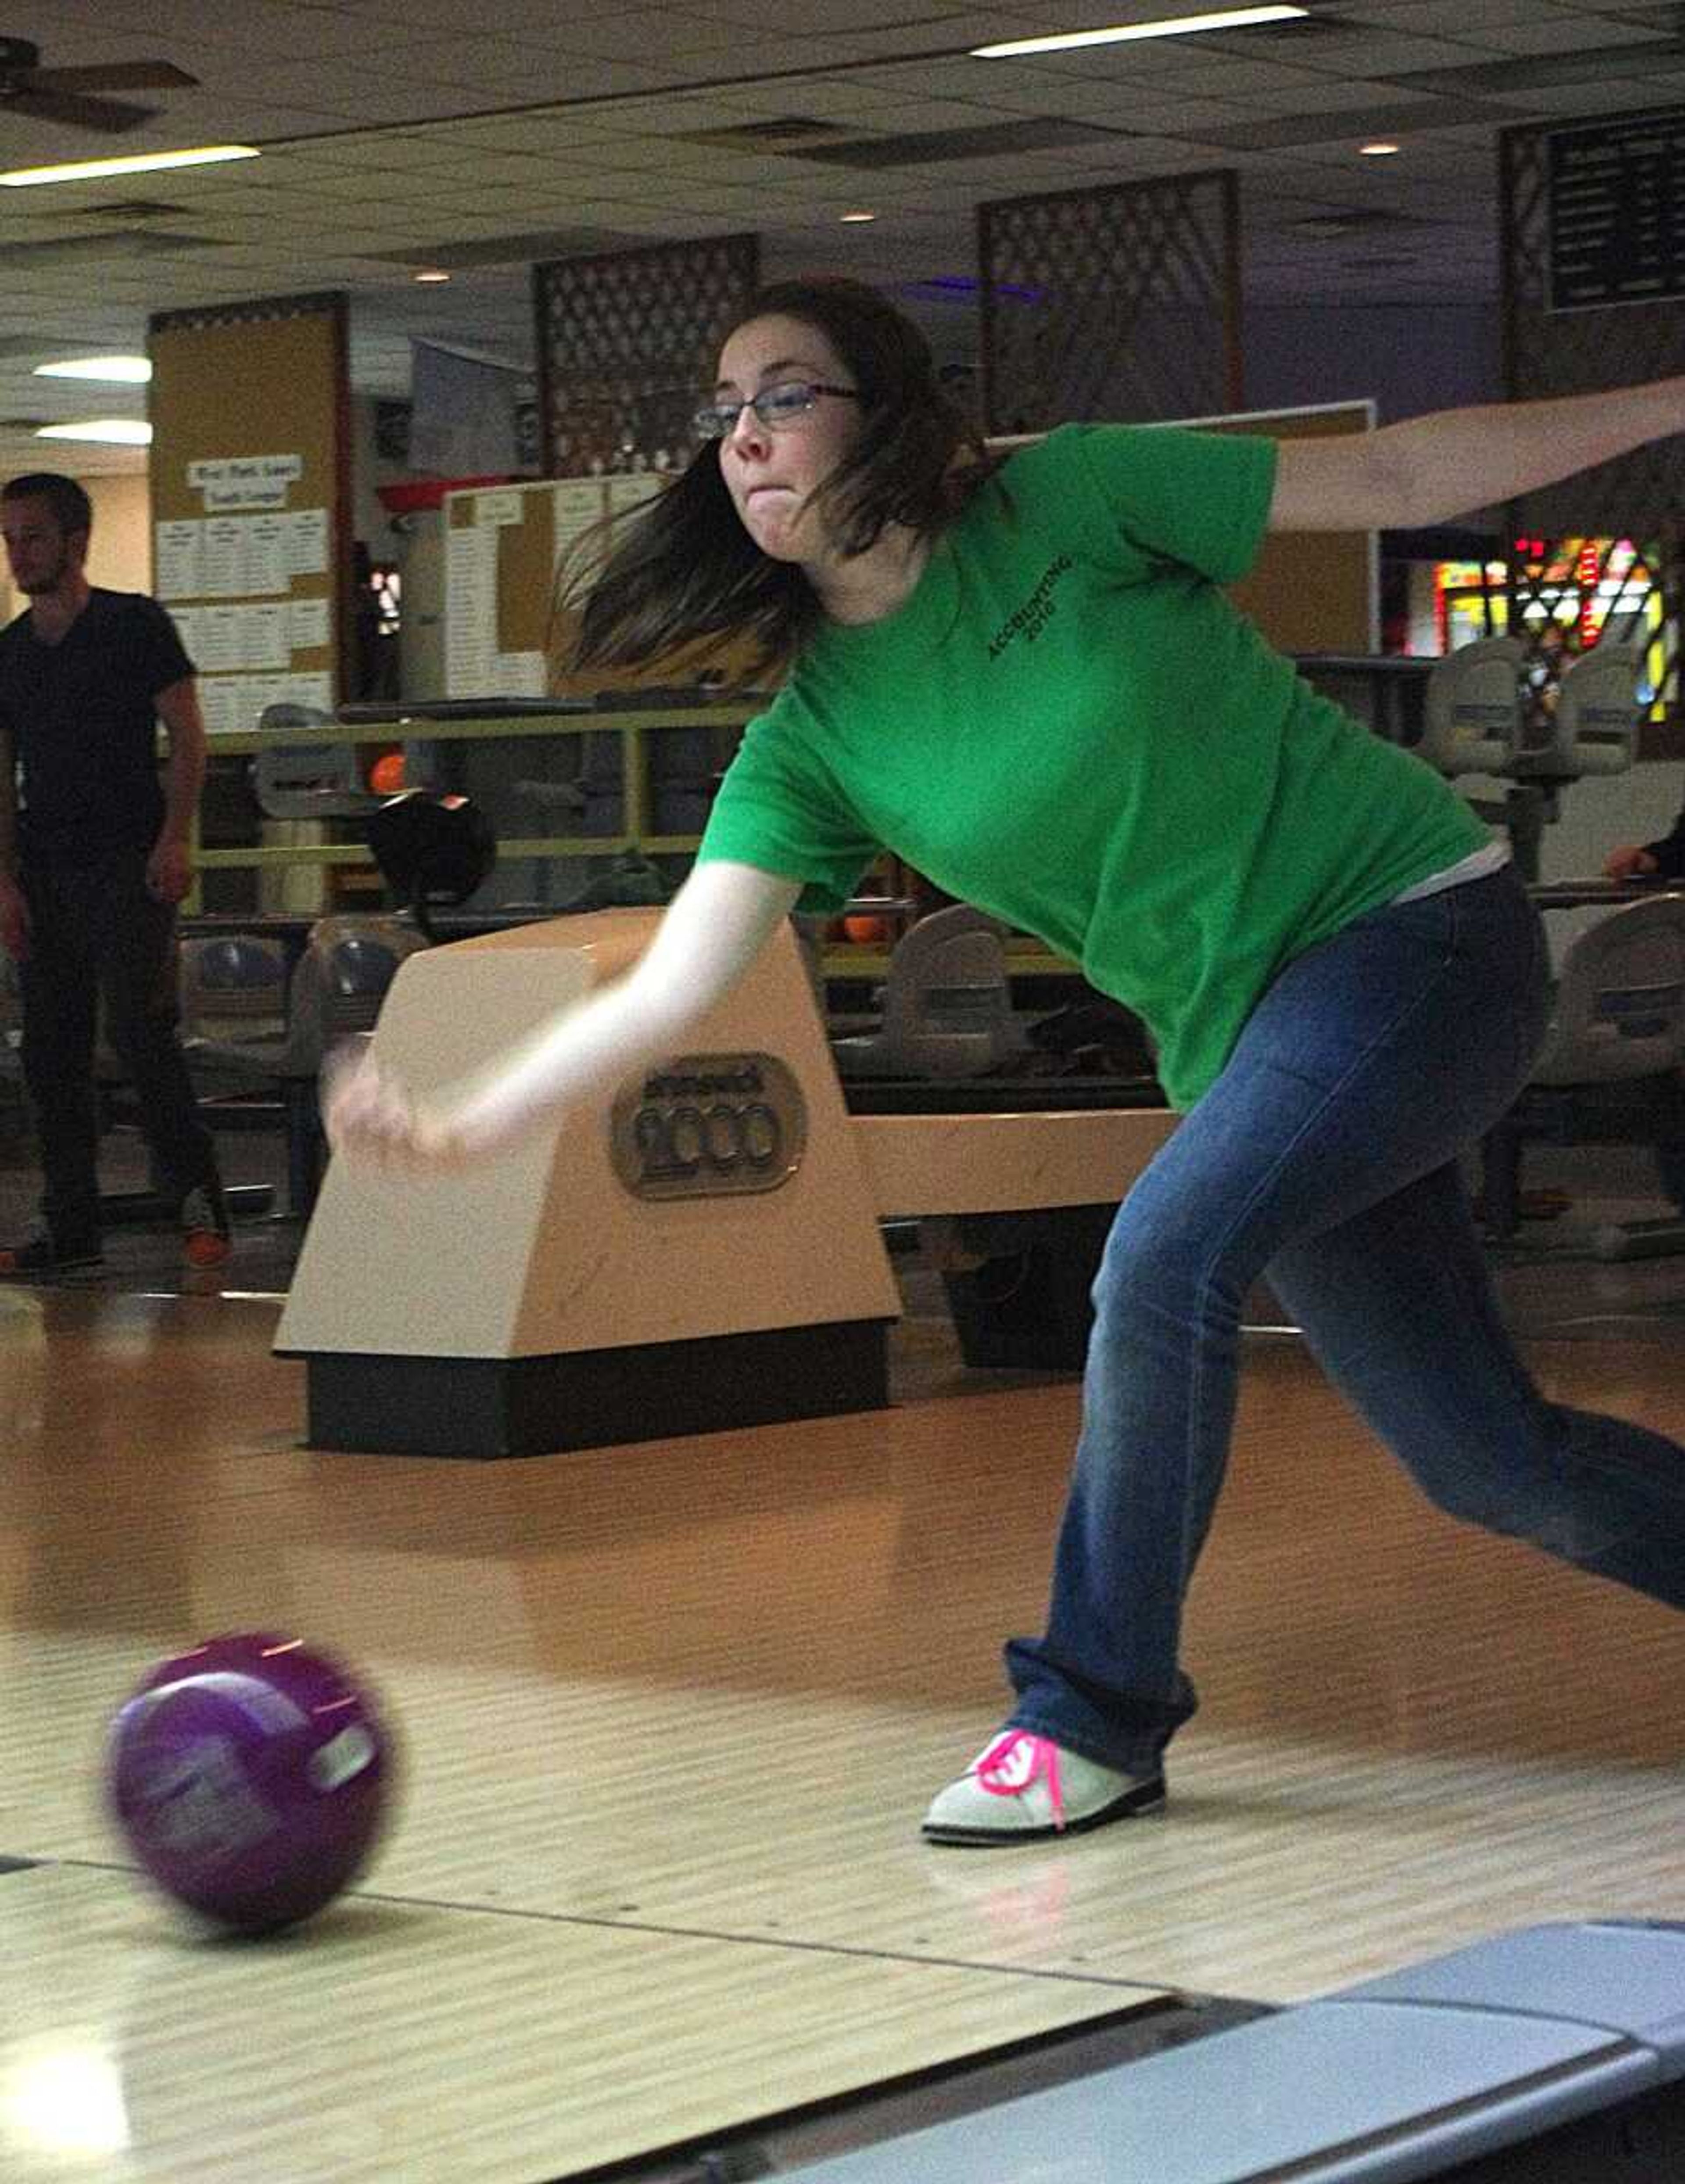 Student Jerriylnn Kraus won the bowling tournament hosted by Recreation Services. Photo by Nathan Hamilton